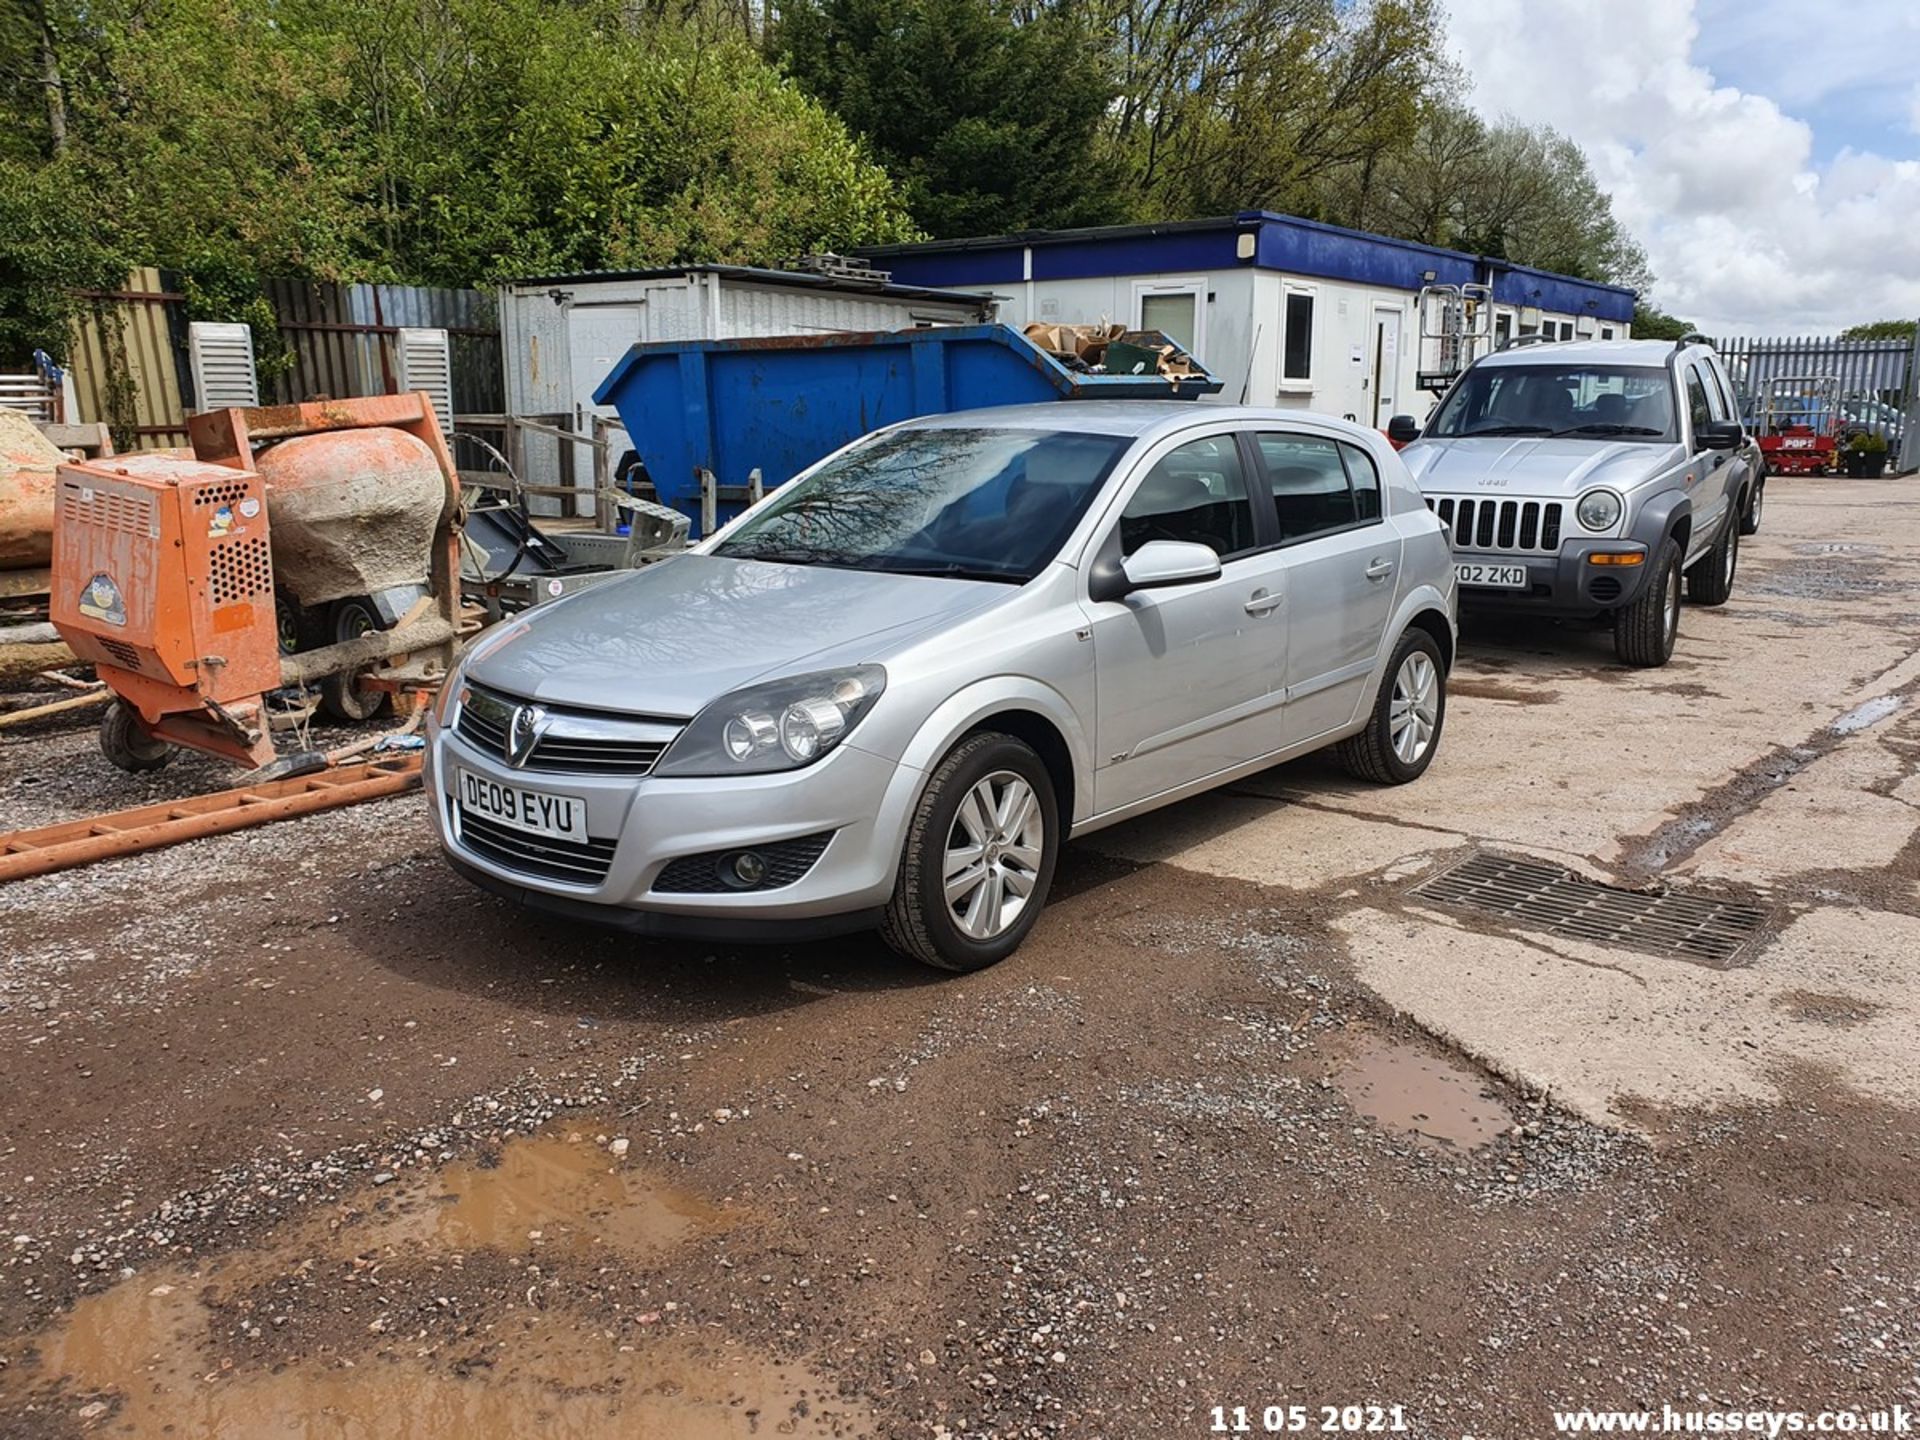 09/09 VAUXHALL ASTRA SXI TWINPORT - 1364cc 5dr Hatchback (Silver, 101k) - Image 3 of 13